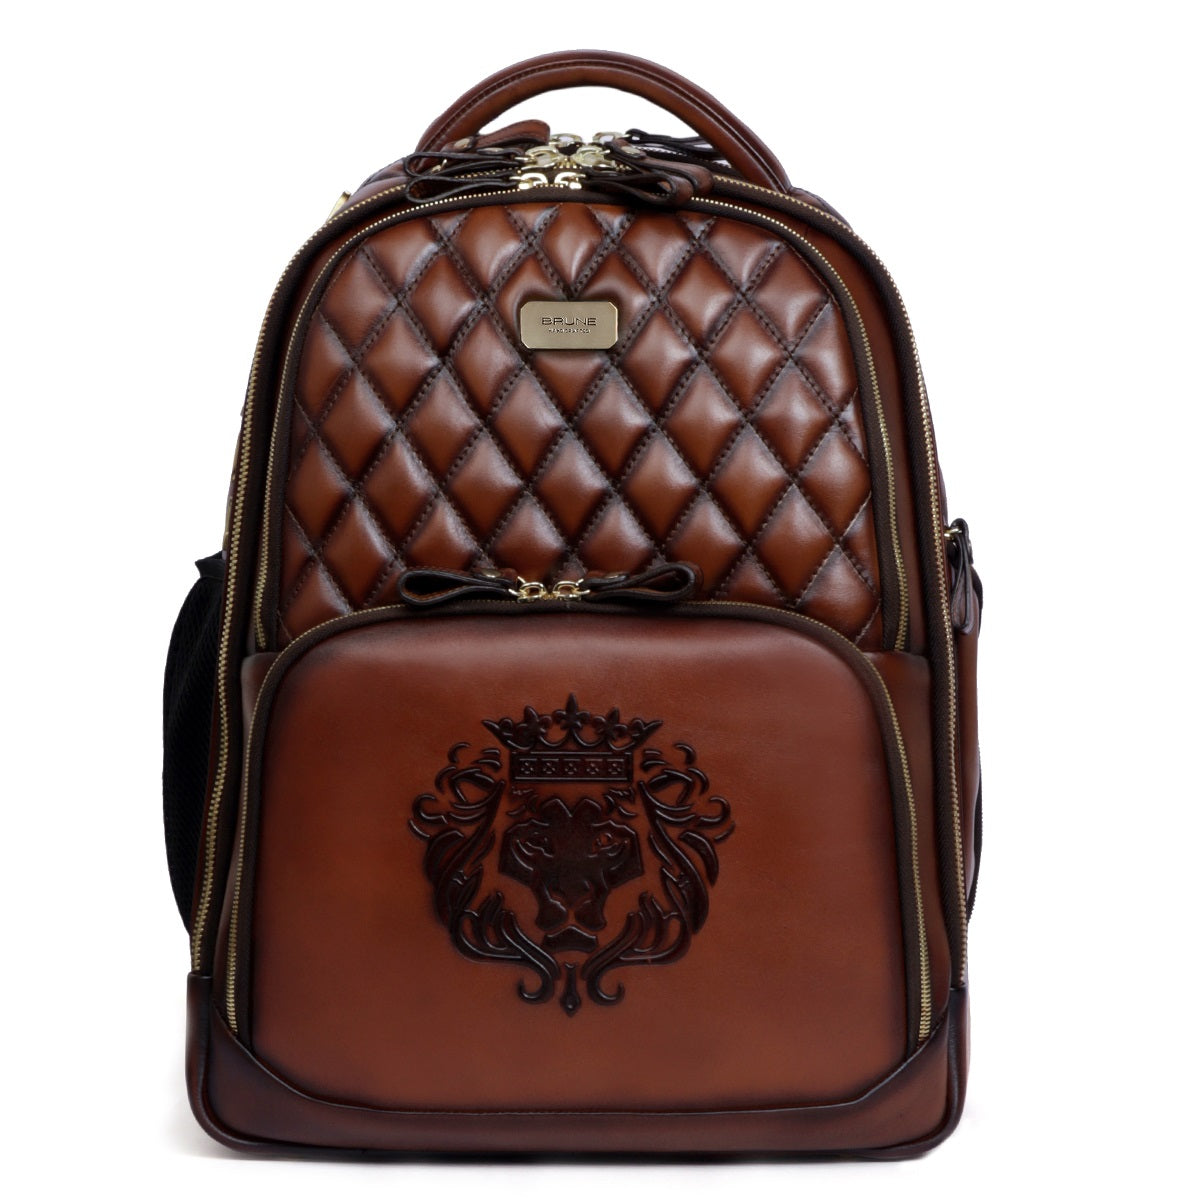 Diamond Stitched Dark Brown Leather Super Functional Backpack with Embossed Lion Logo by Brune & Bareskin